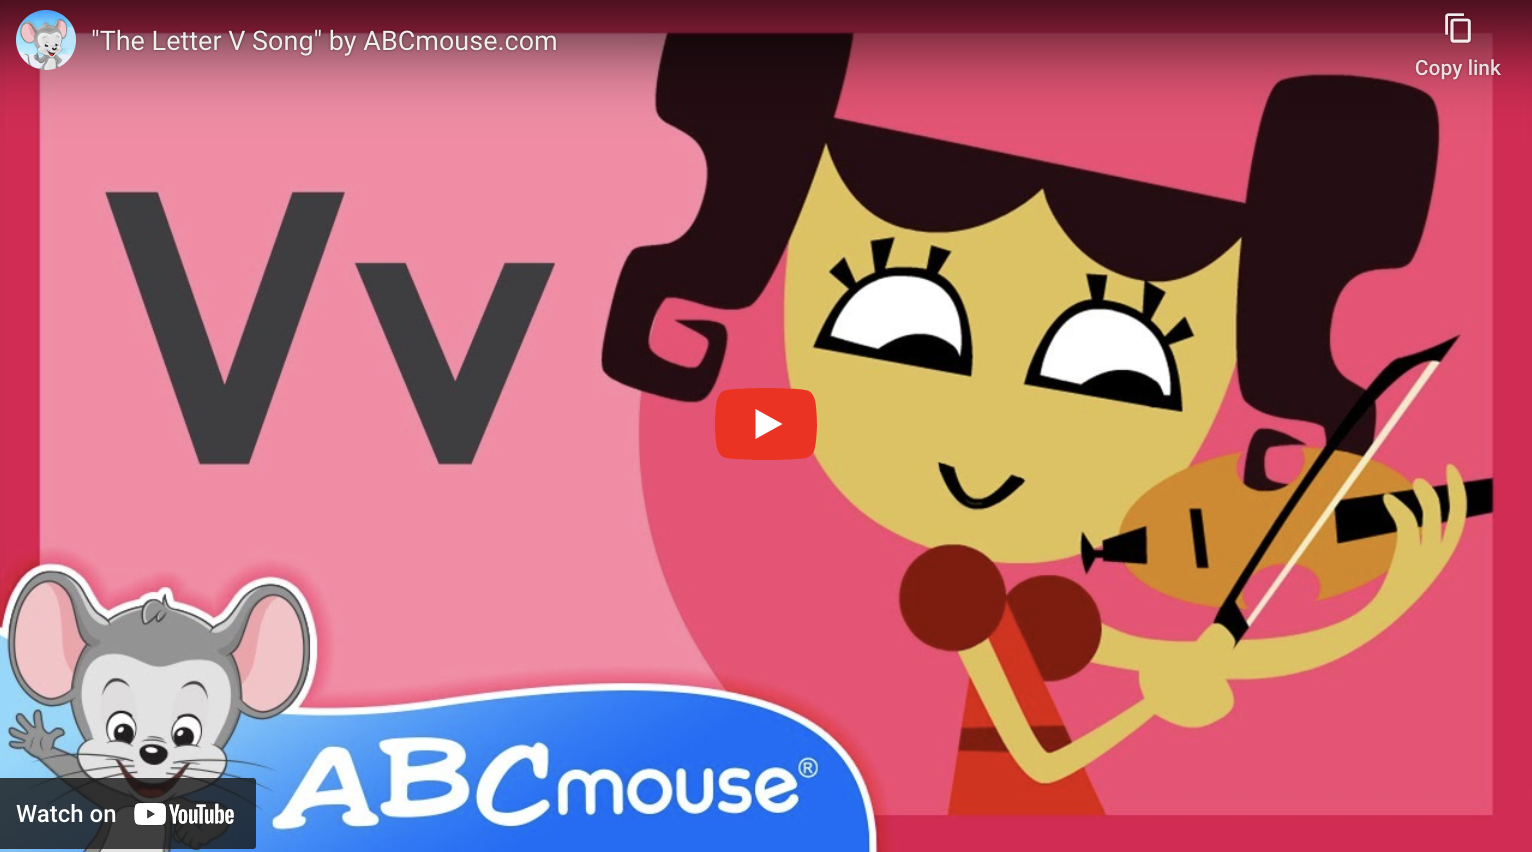 Free letter v song from ABCmouse.com. 